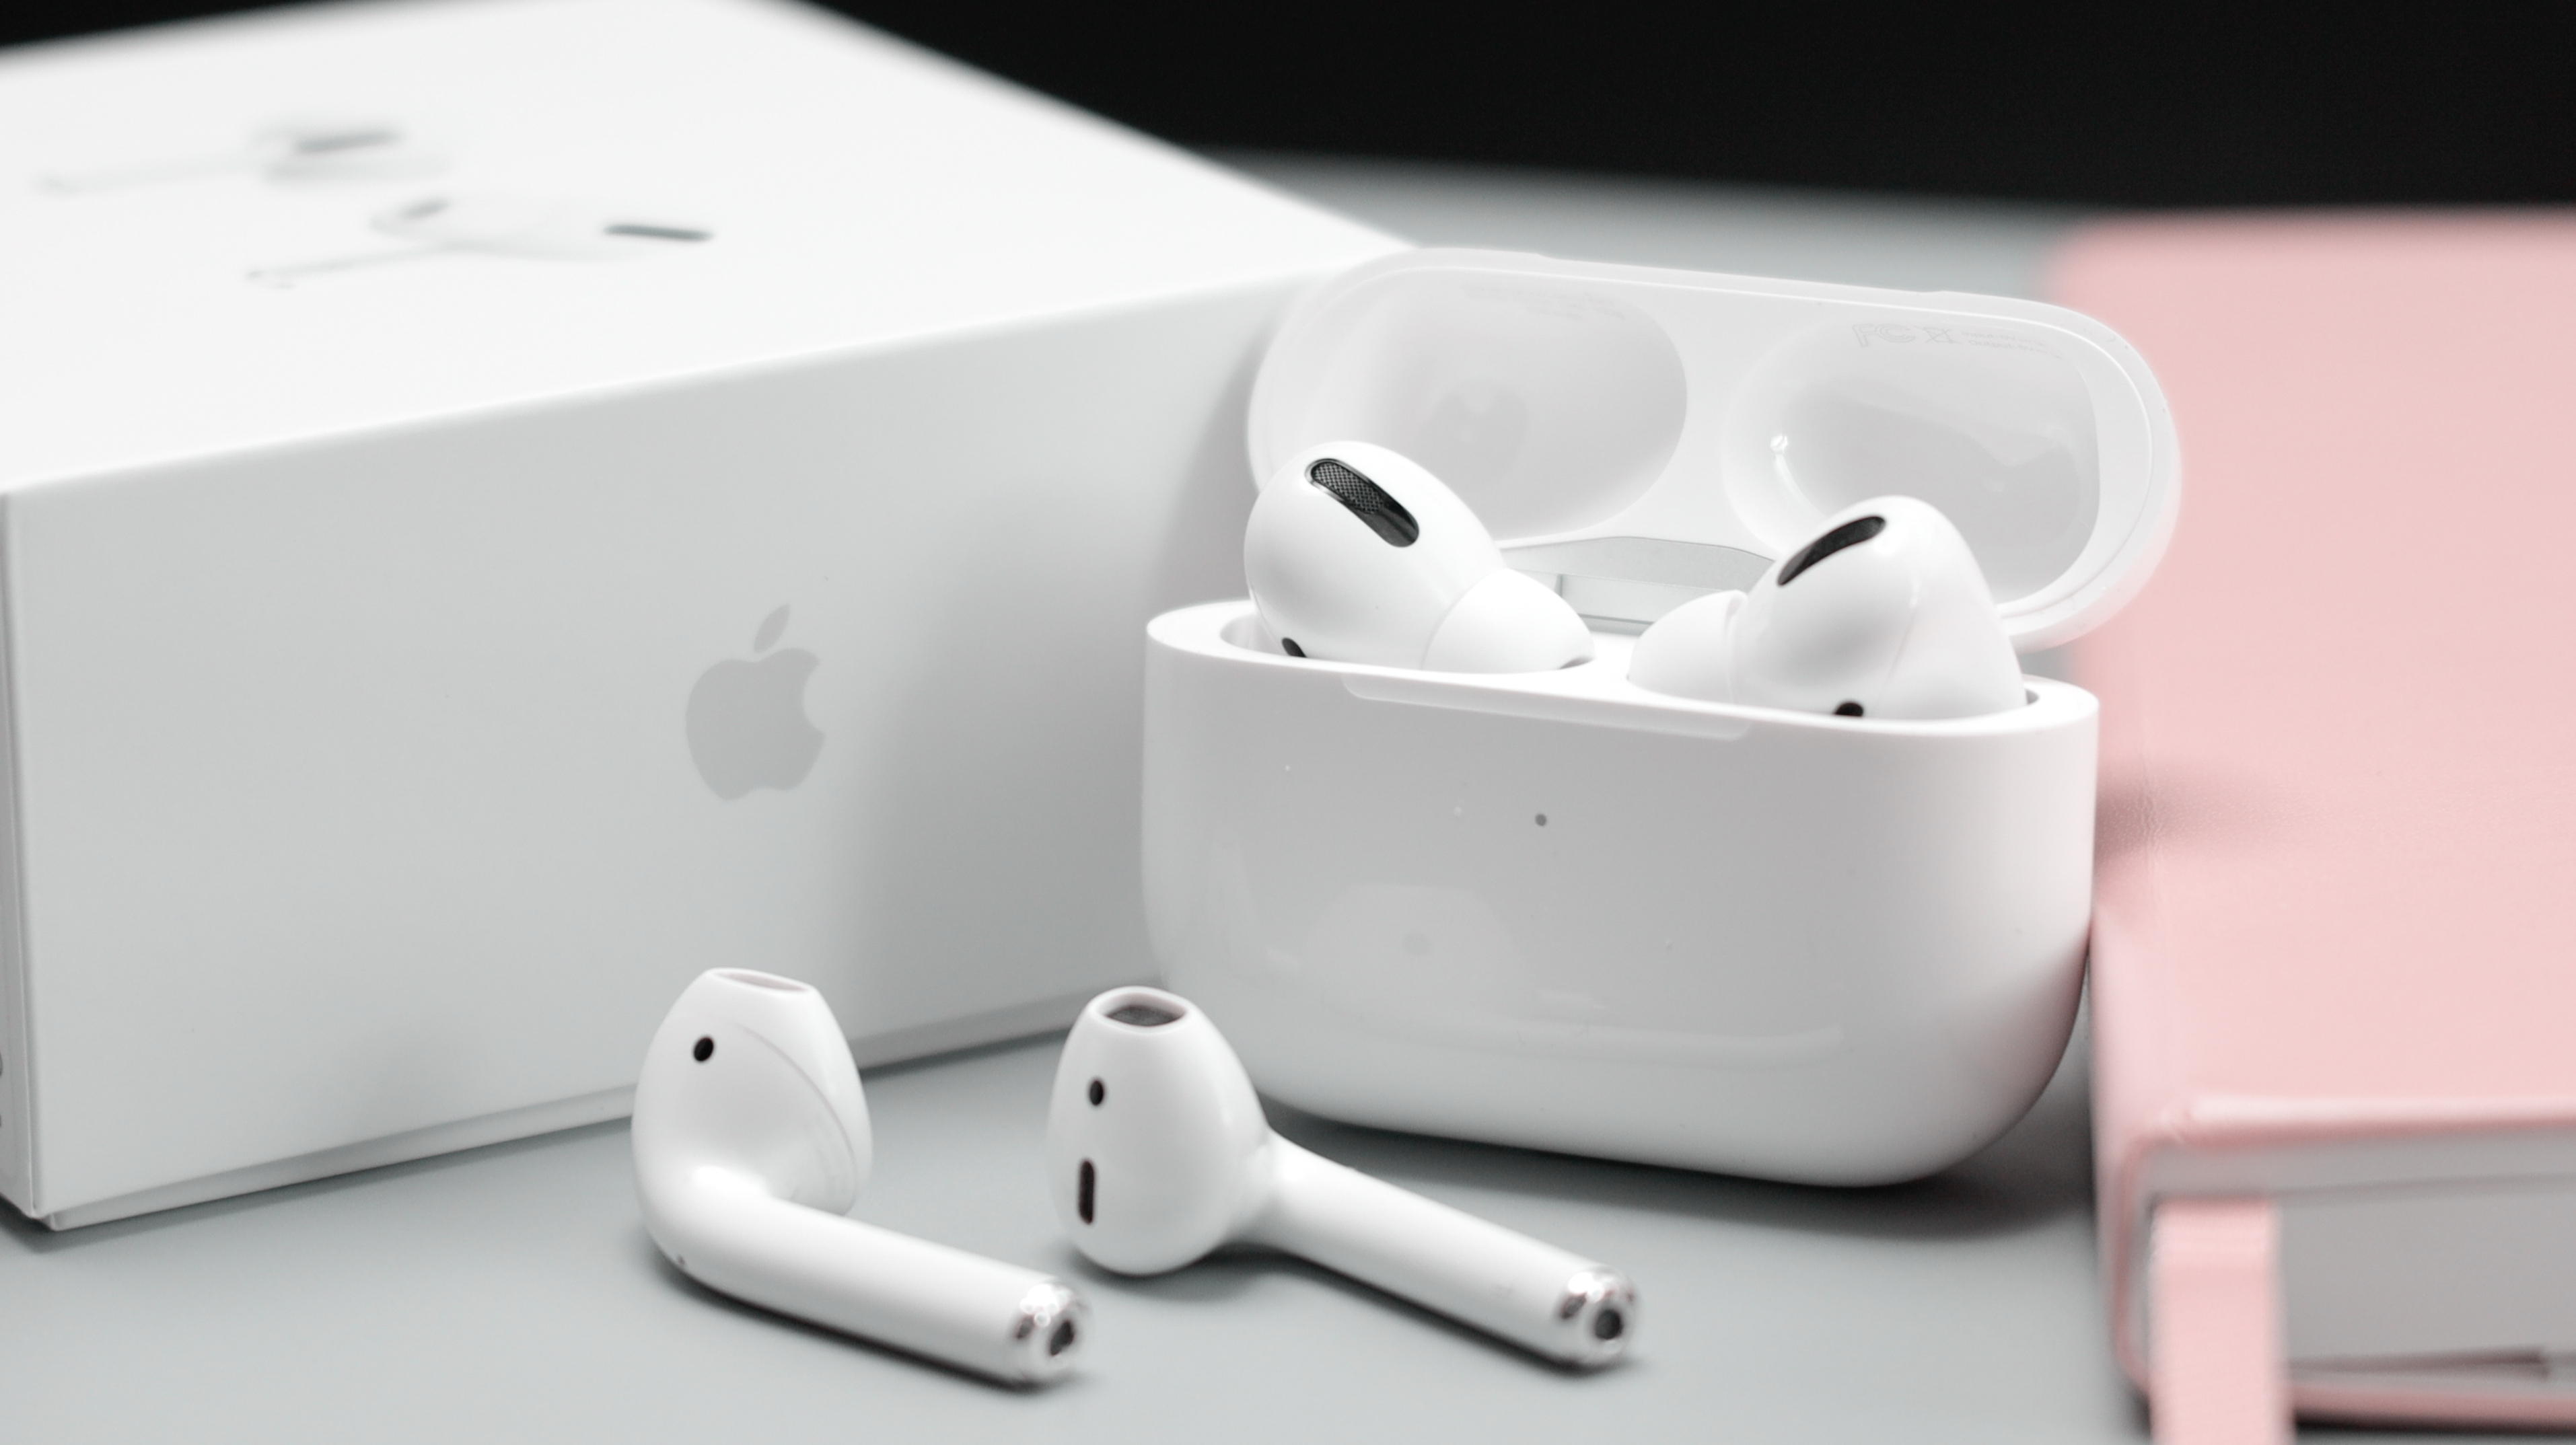 Airpods green. Apple AIRPODS 2. Эппл аирподс 3. Apple AIRPODS Pro 2. Apple AIRPODS Pro 3.